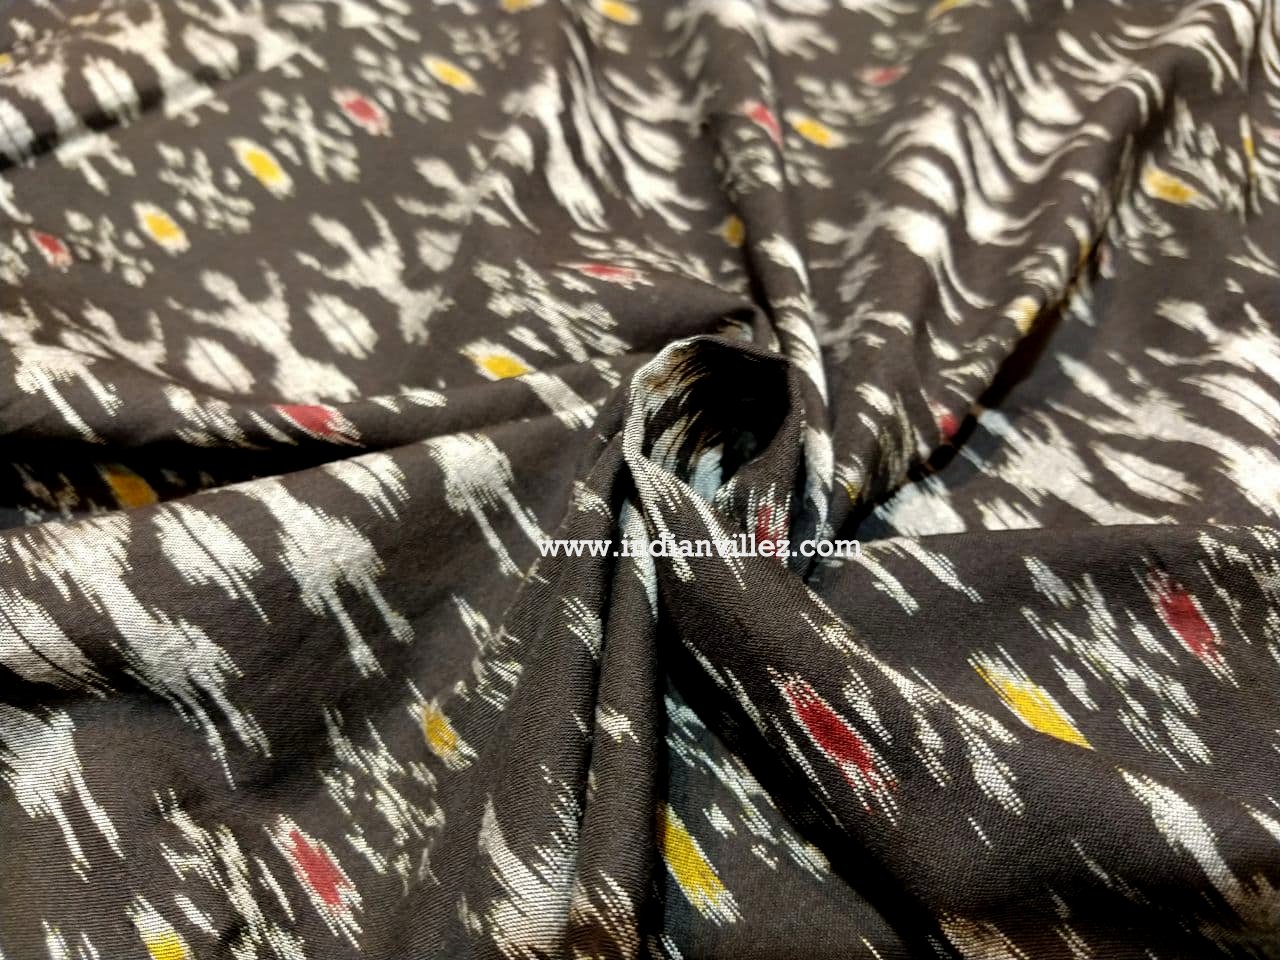 White Tribal on Black with Red & Yellow Motif Cotton Ikat Handloom Fabric - IndianVillèz